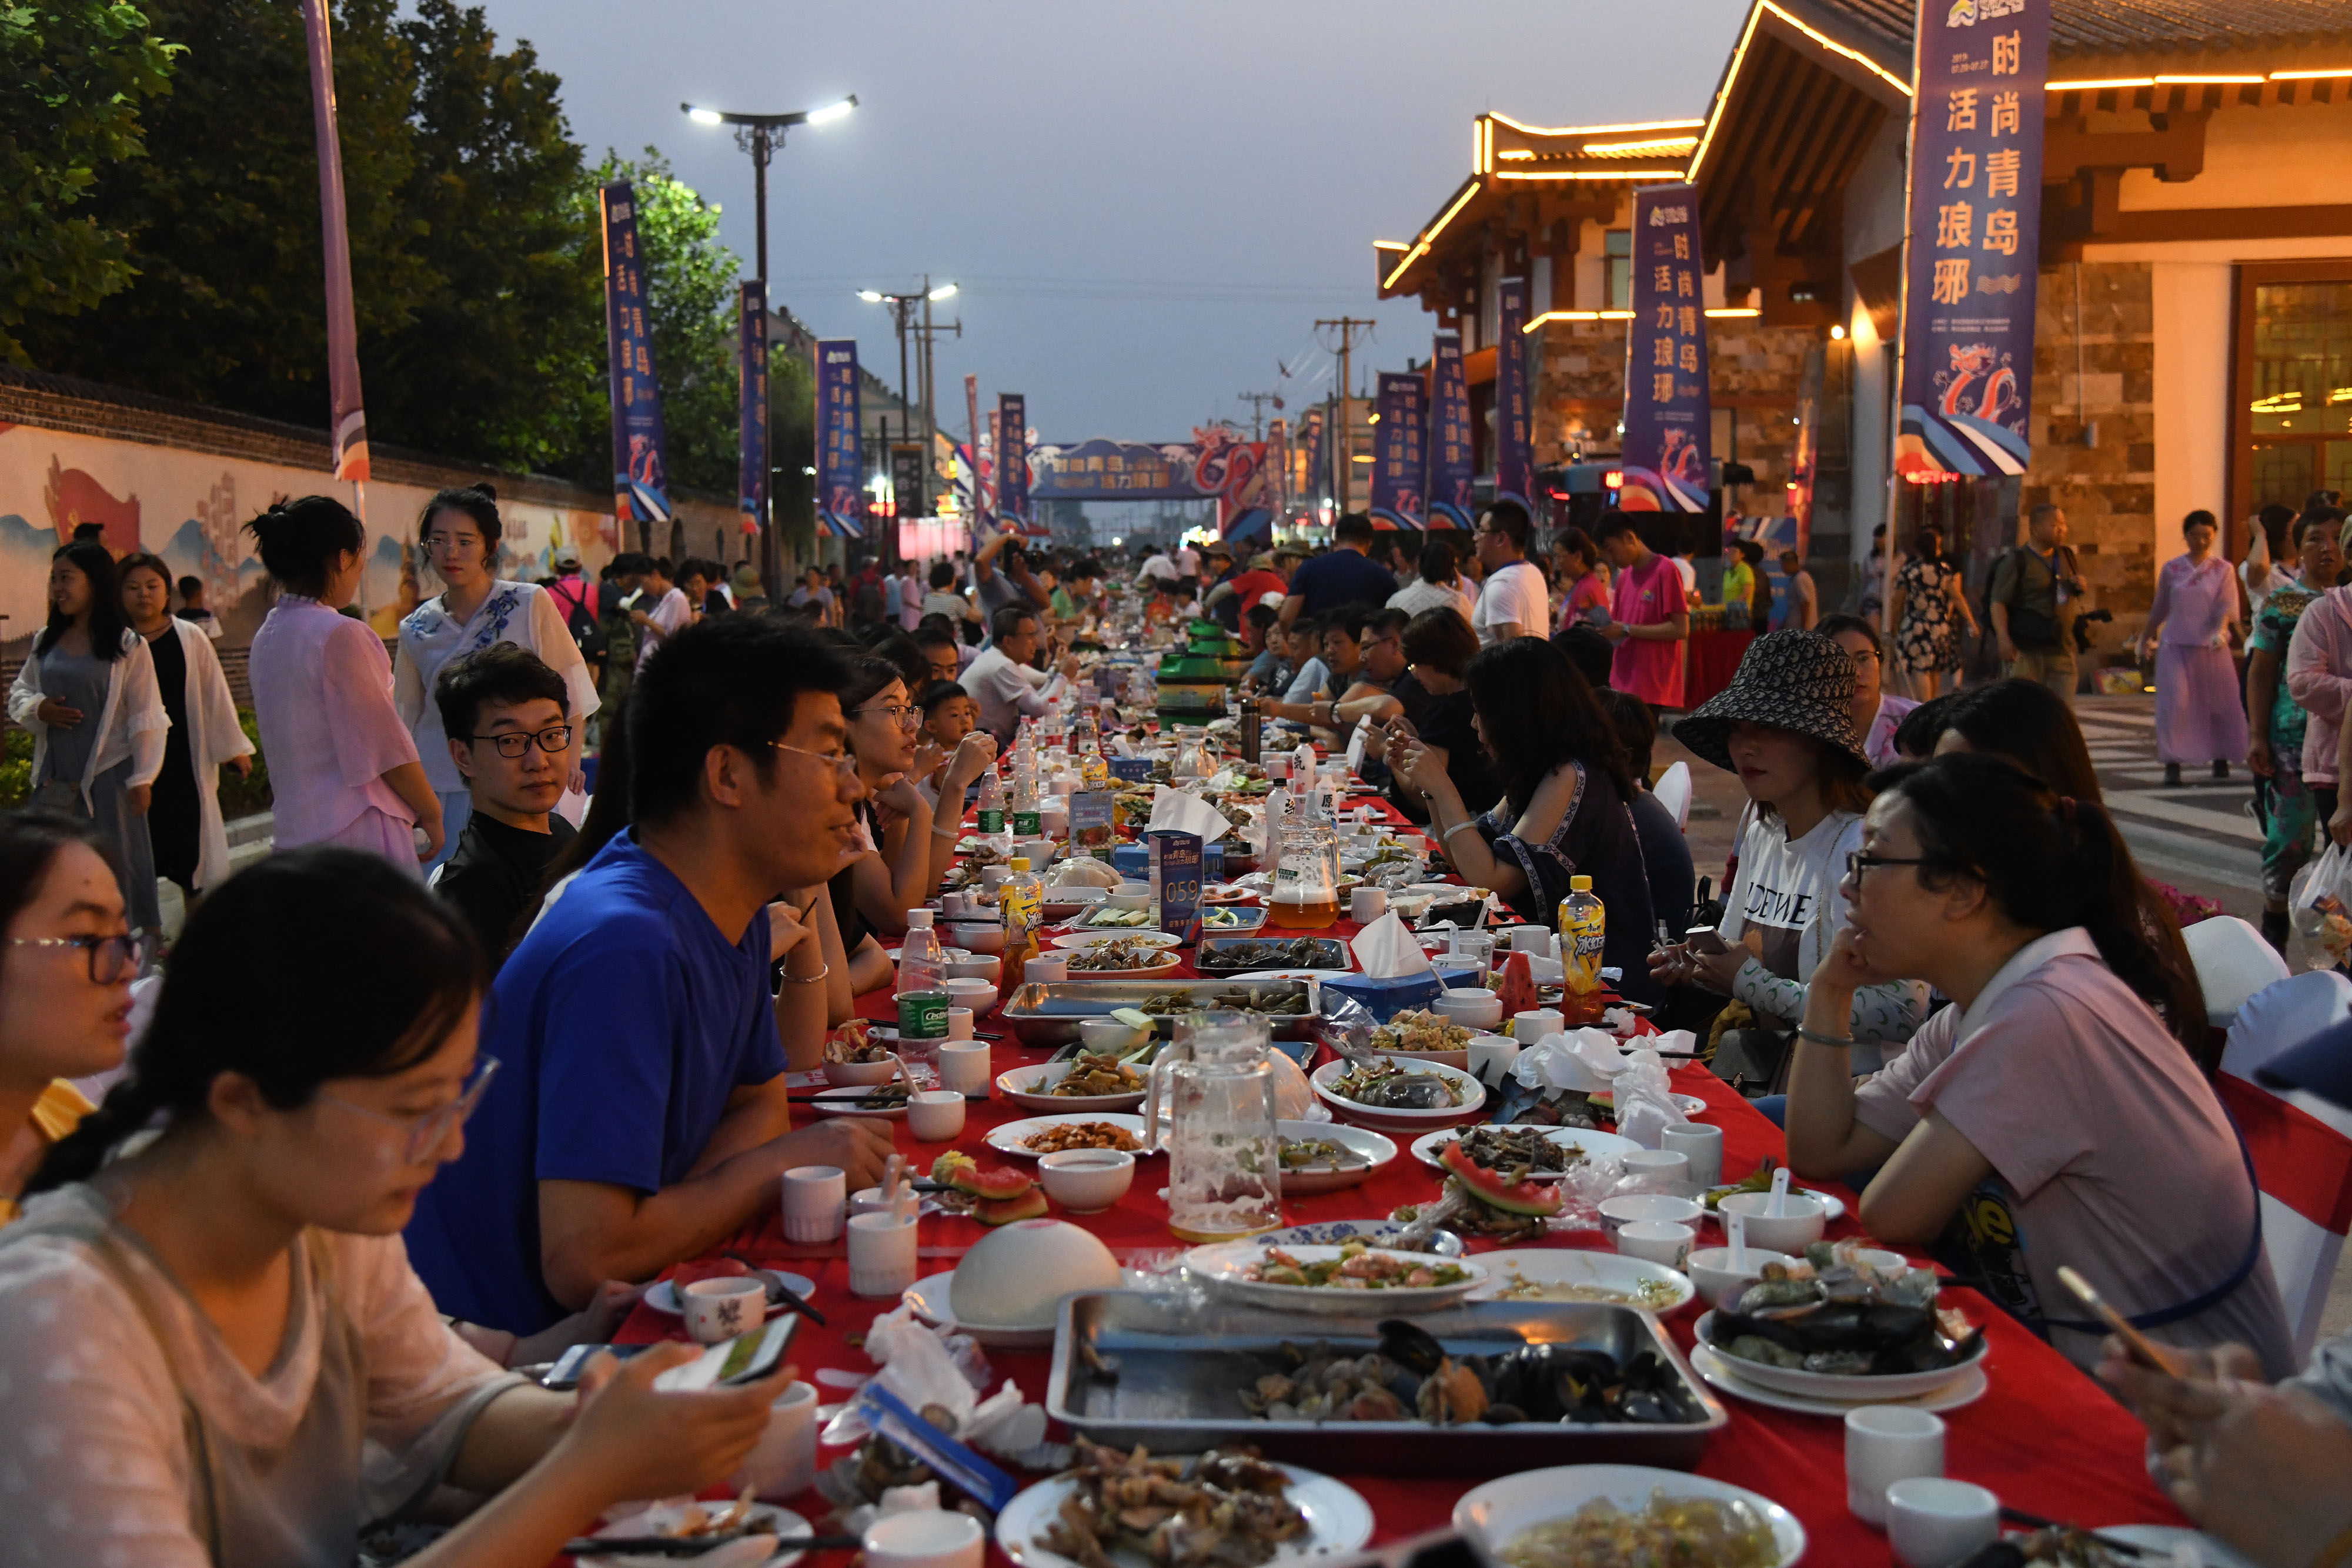 Rising popularity of food, cultural services at night a sign of China's